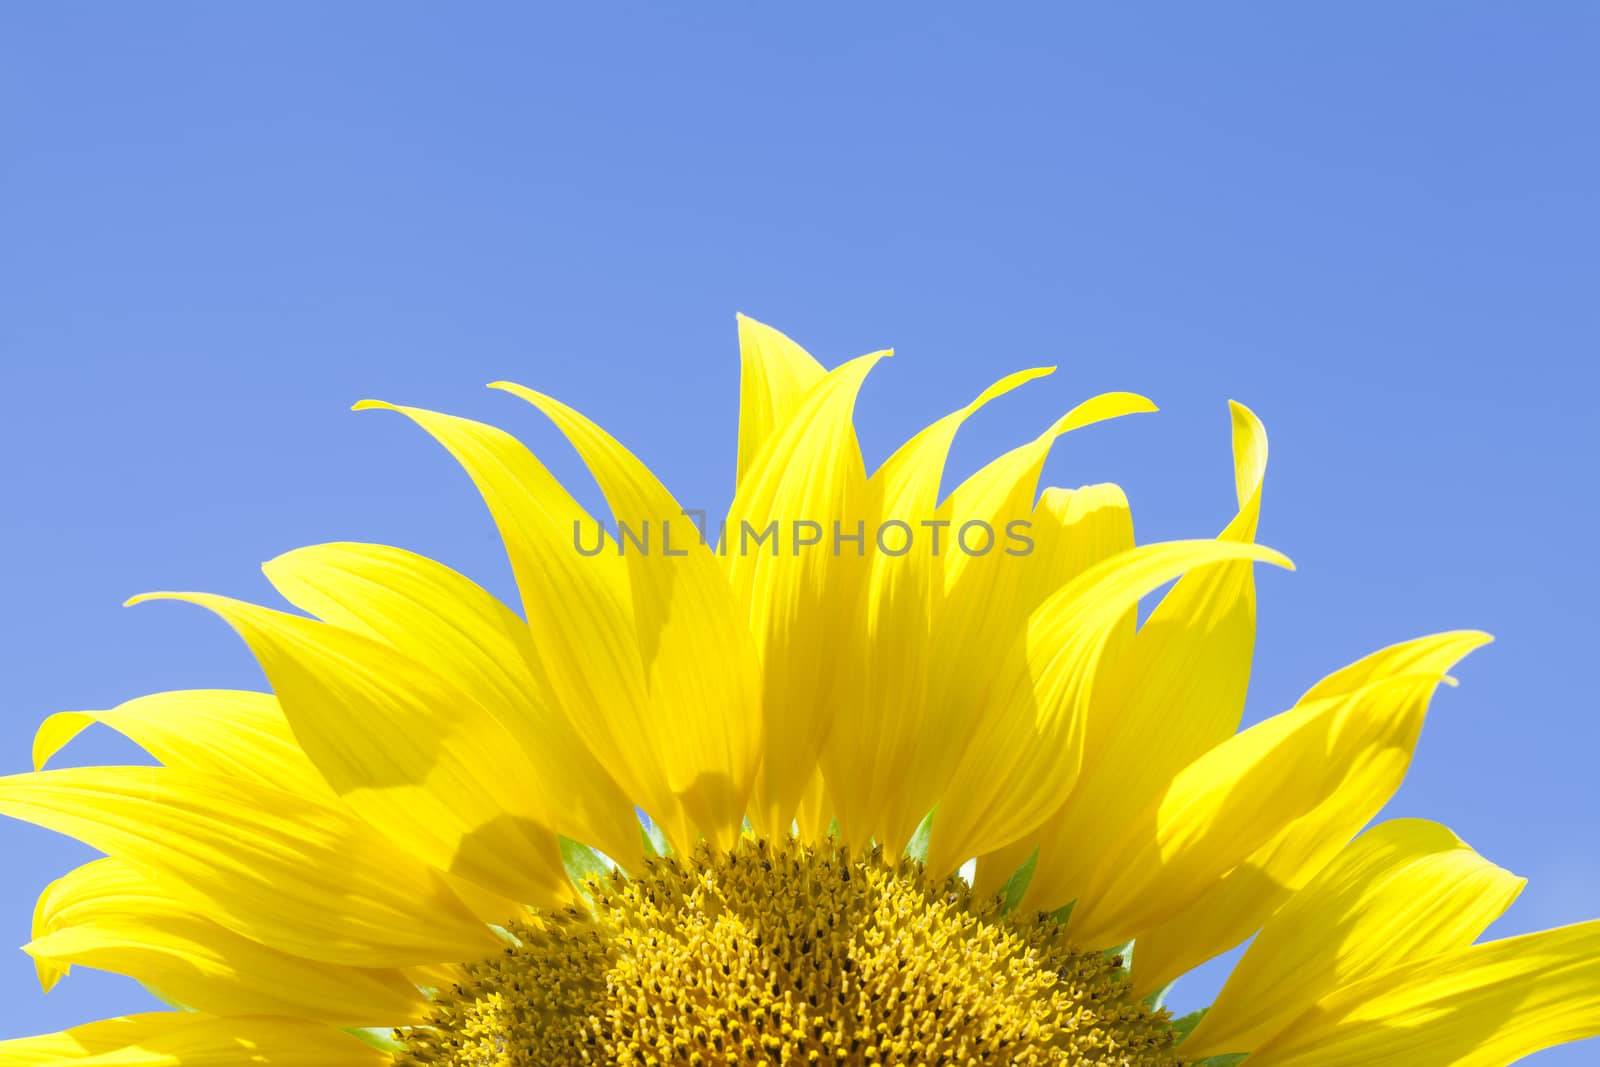 Sunflower with blue sky by jee1999